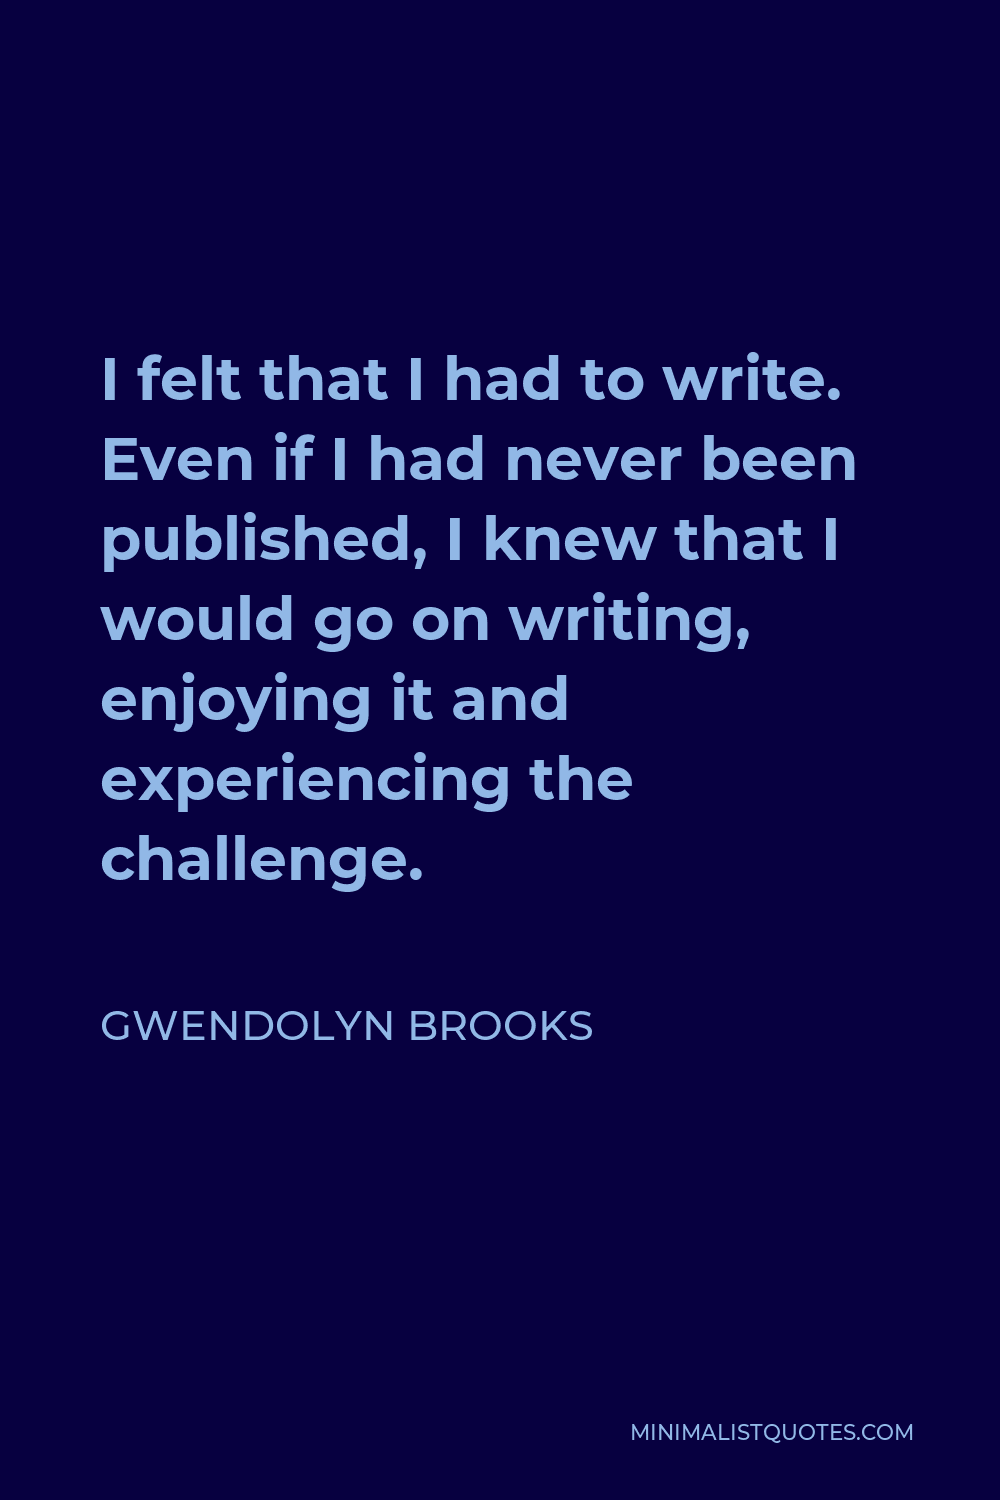 Gwendolyn Brooks Quote - I felt that I had to write. Even if I had never been published, I knew that I would go on writing, enjoying it and experiencing the challenge.